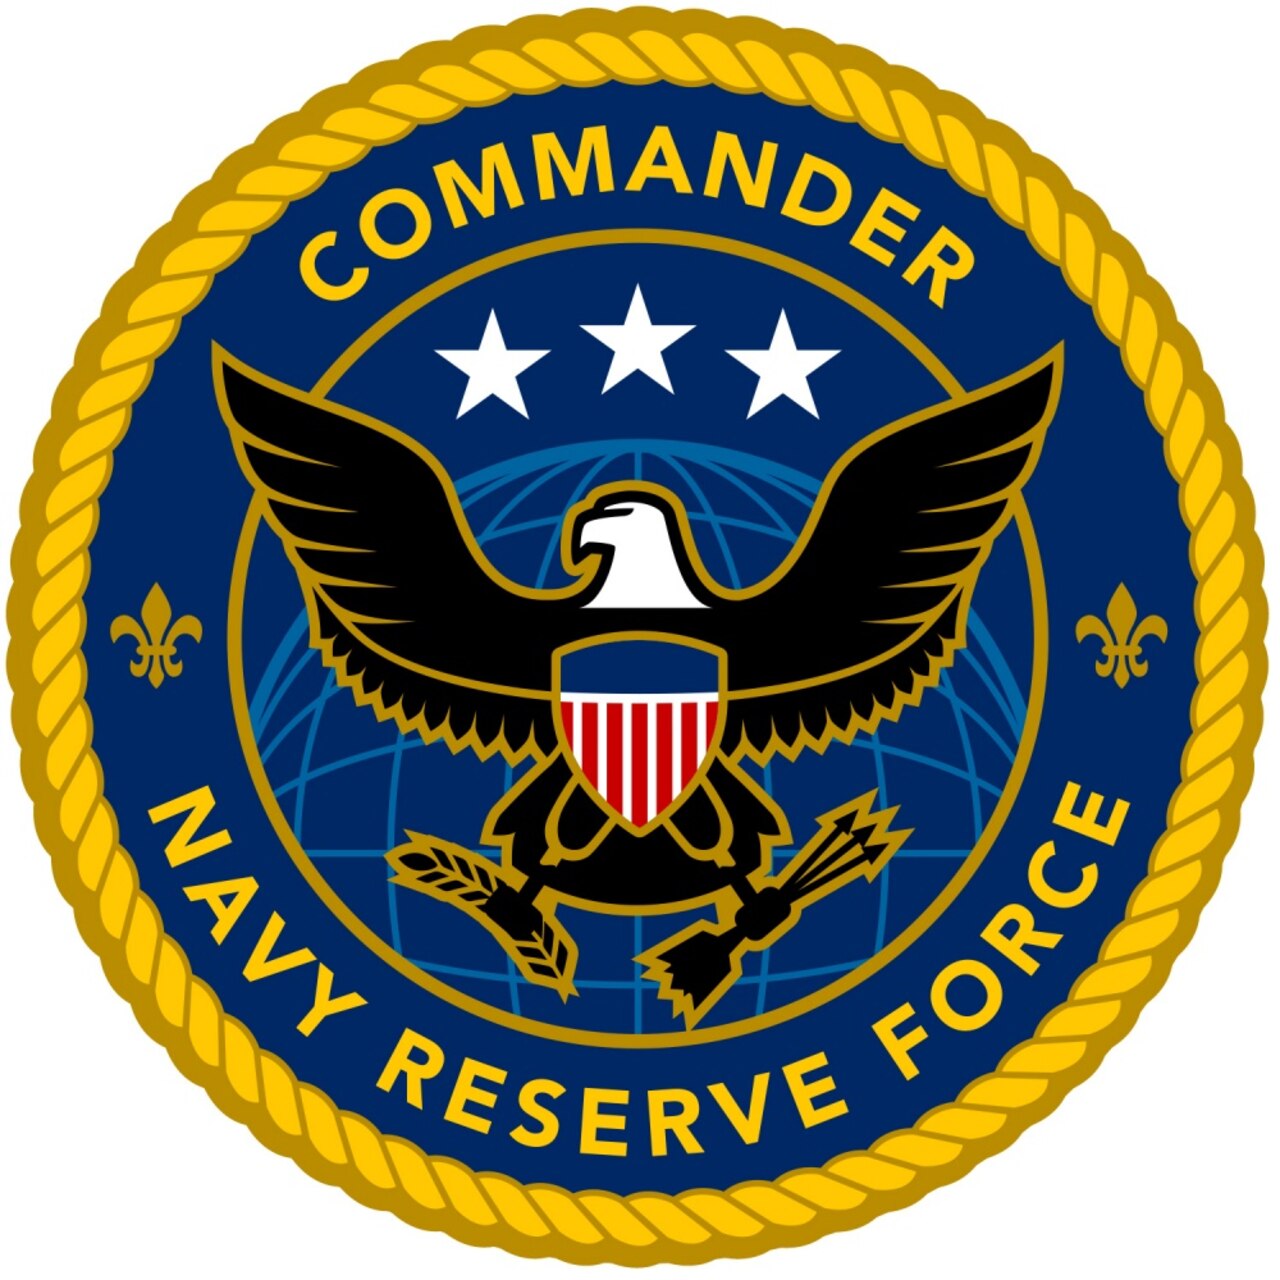 Navy Reserve Extends Drill Postponement Until May 31, Consolidates